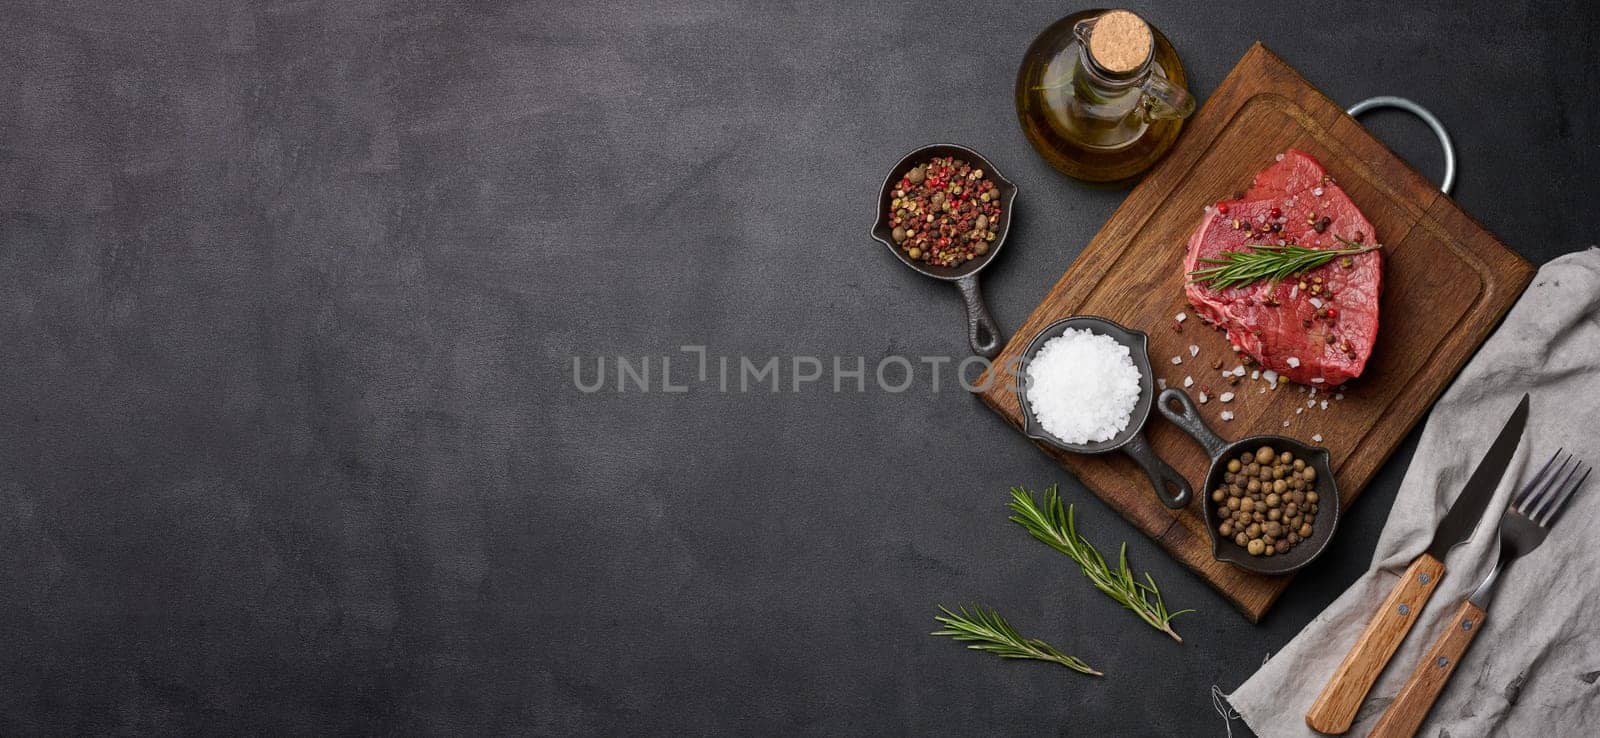 Raw piece of beef with spices pepper, rosemary sprig, salt and olive oil on a wooden board, black background. Copy space